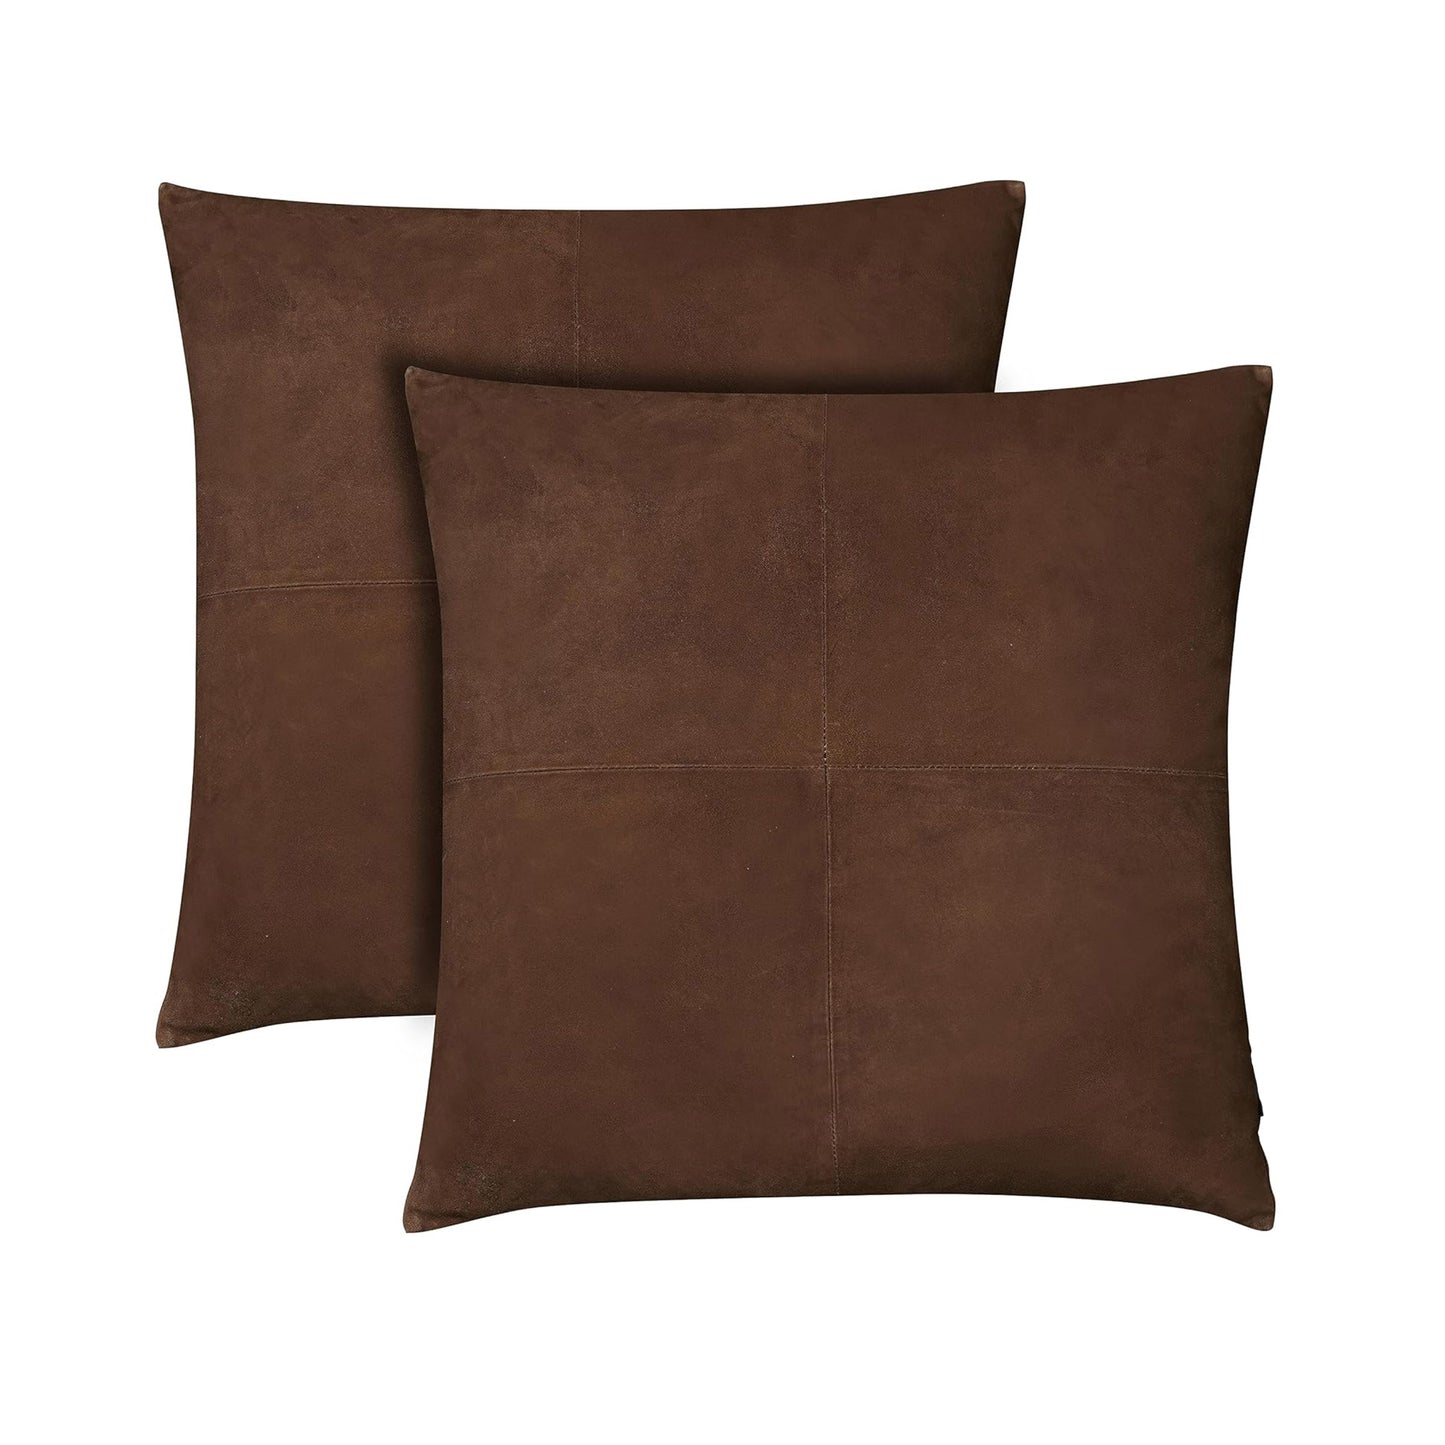 Darkbrown Suede Leather Pillow Cover - ShopSplenor